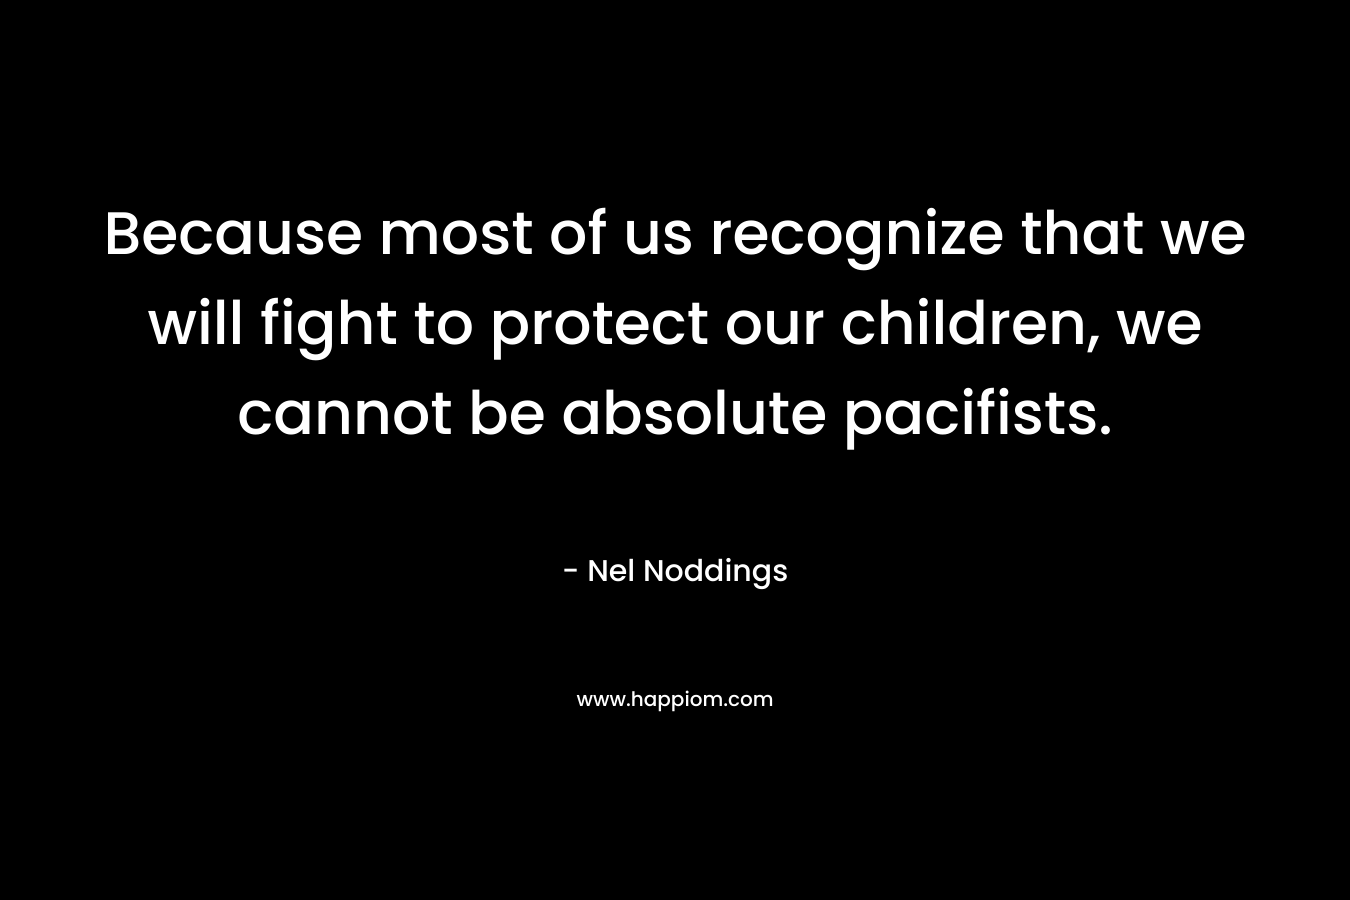 Because most of us recognize that we will fight to protect our children, we cannot be absolute pacifists. – Nel Noddings